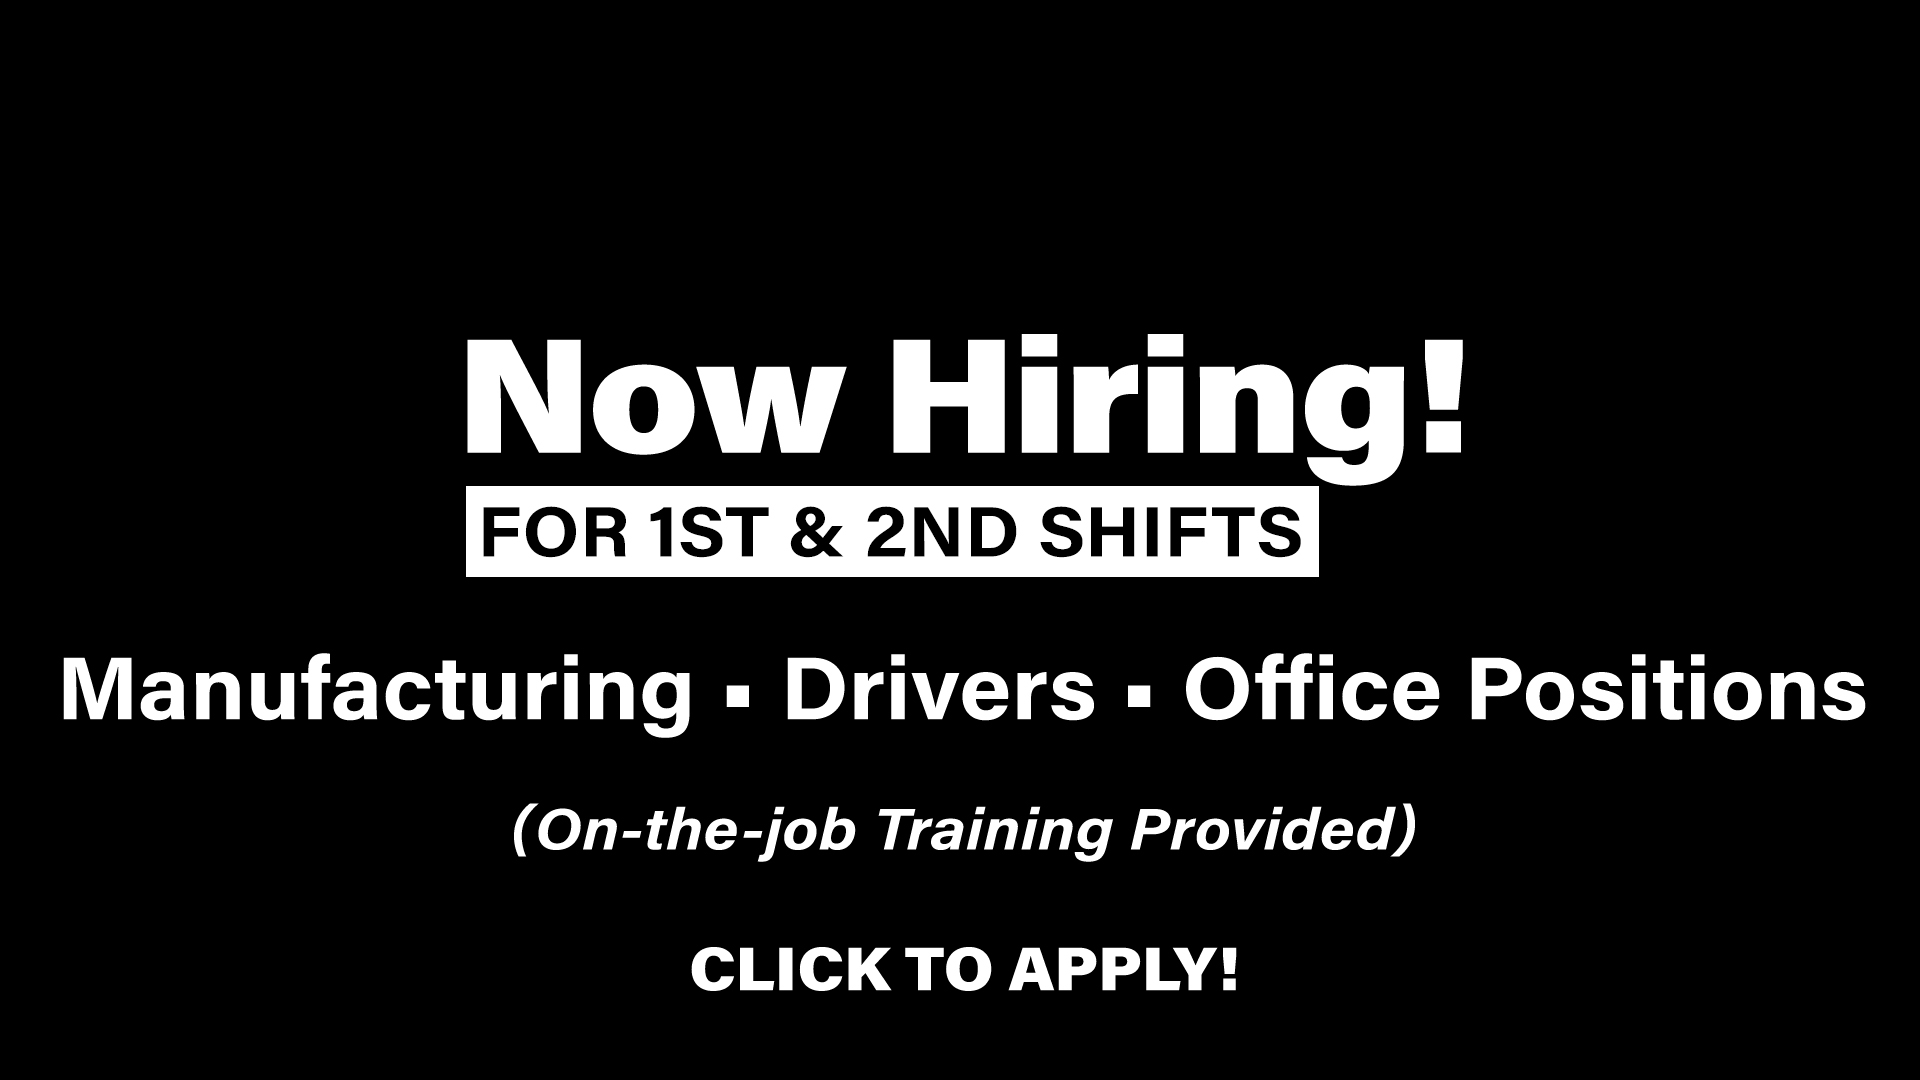 D3 Glass is Now Hiring!